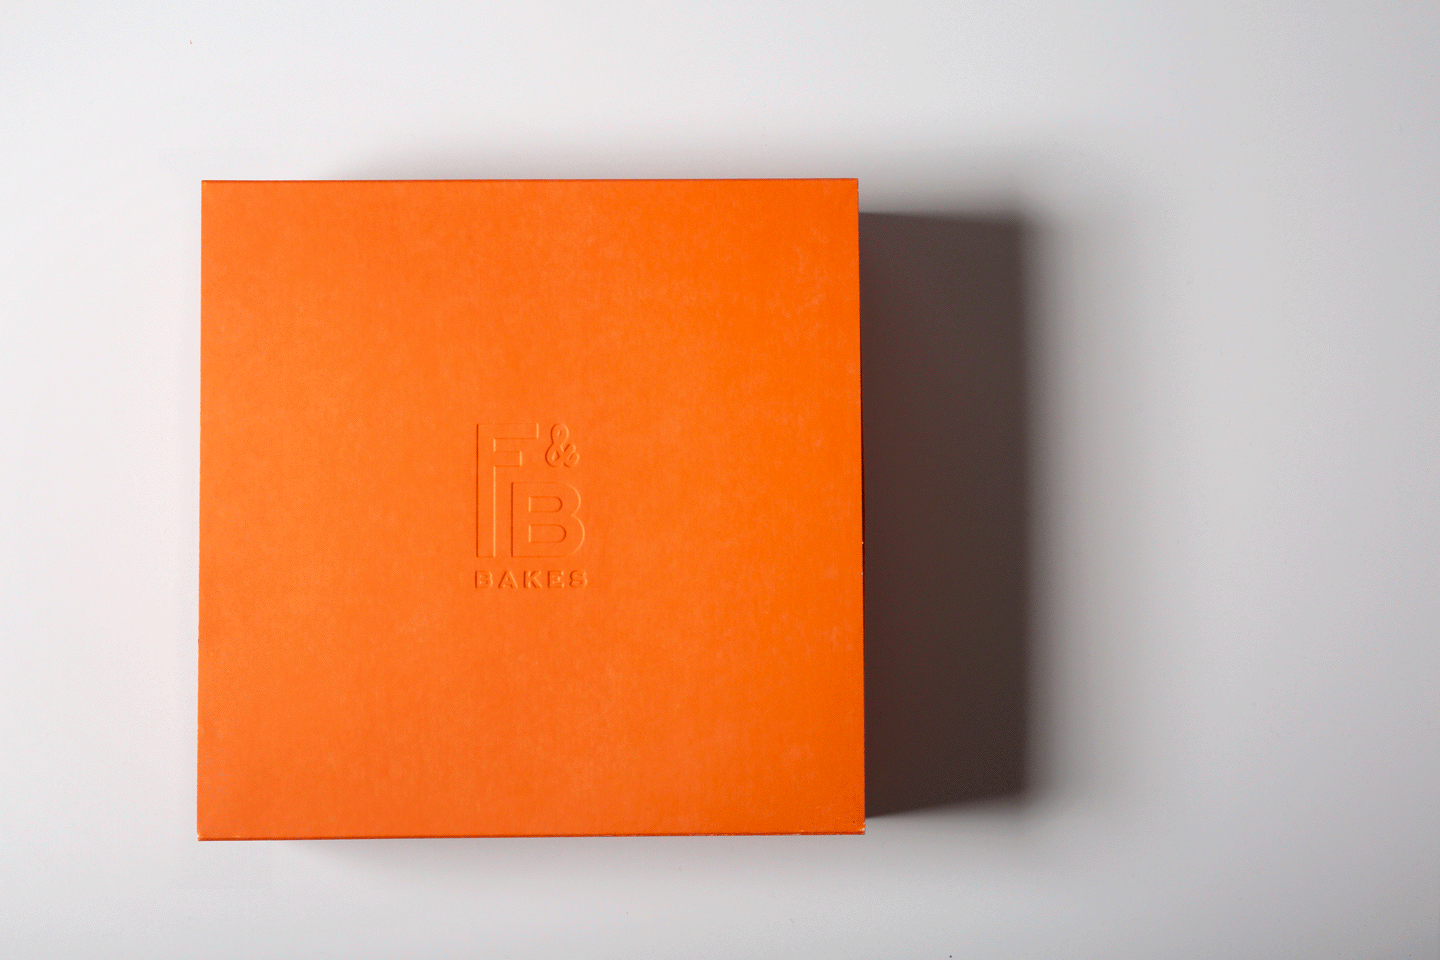 Animation of Flour & Branch debossed orange packaging box sliding open to reveal branded sticker and tissue paper